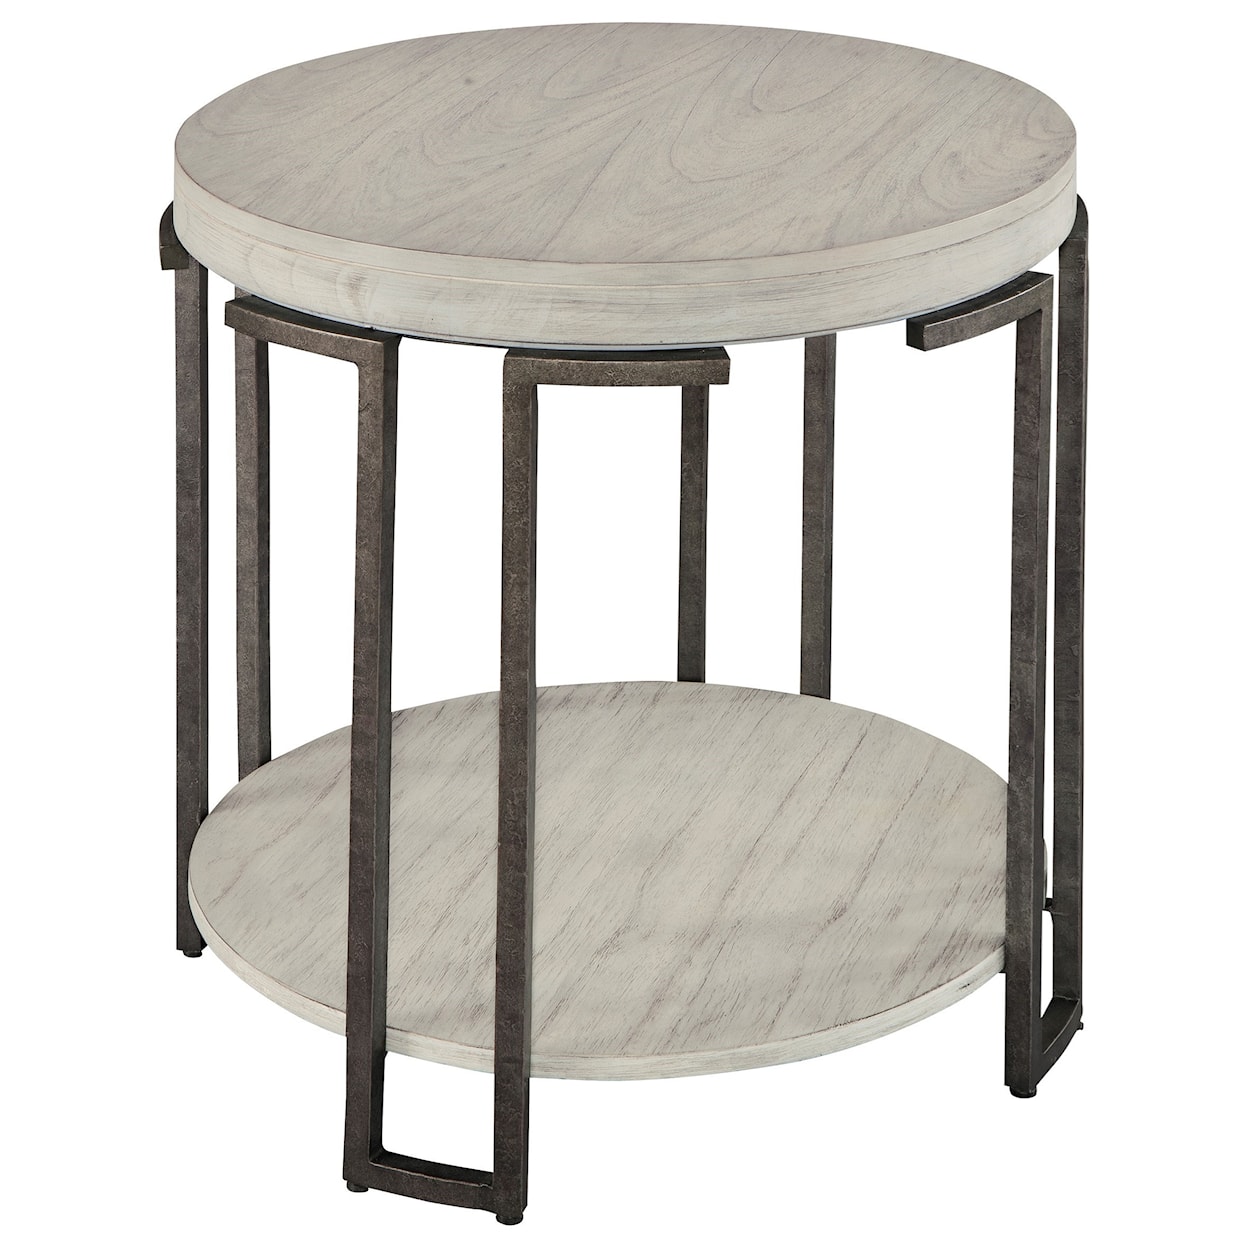 Hekman Sierra Heights Round End Table